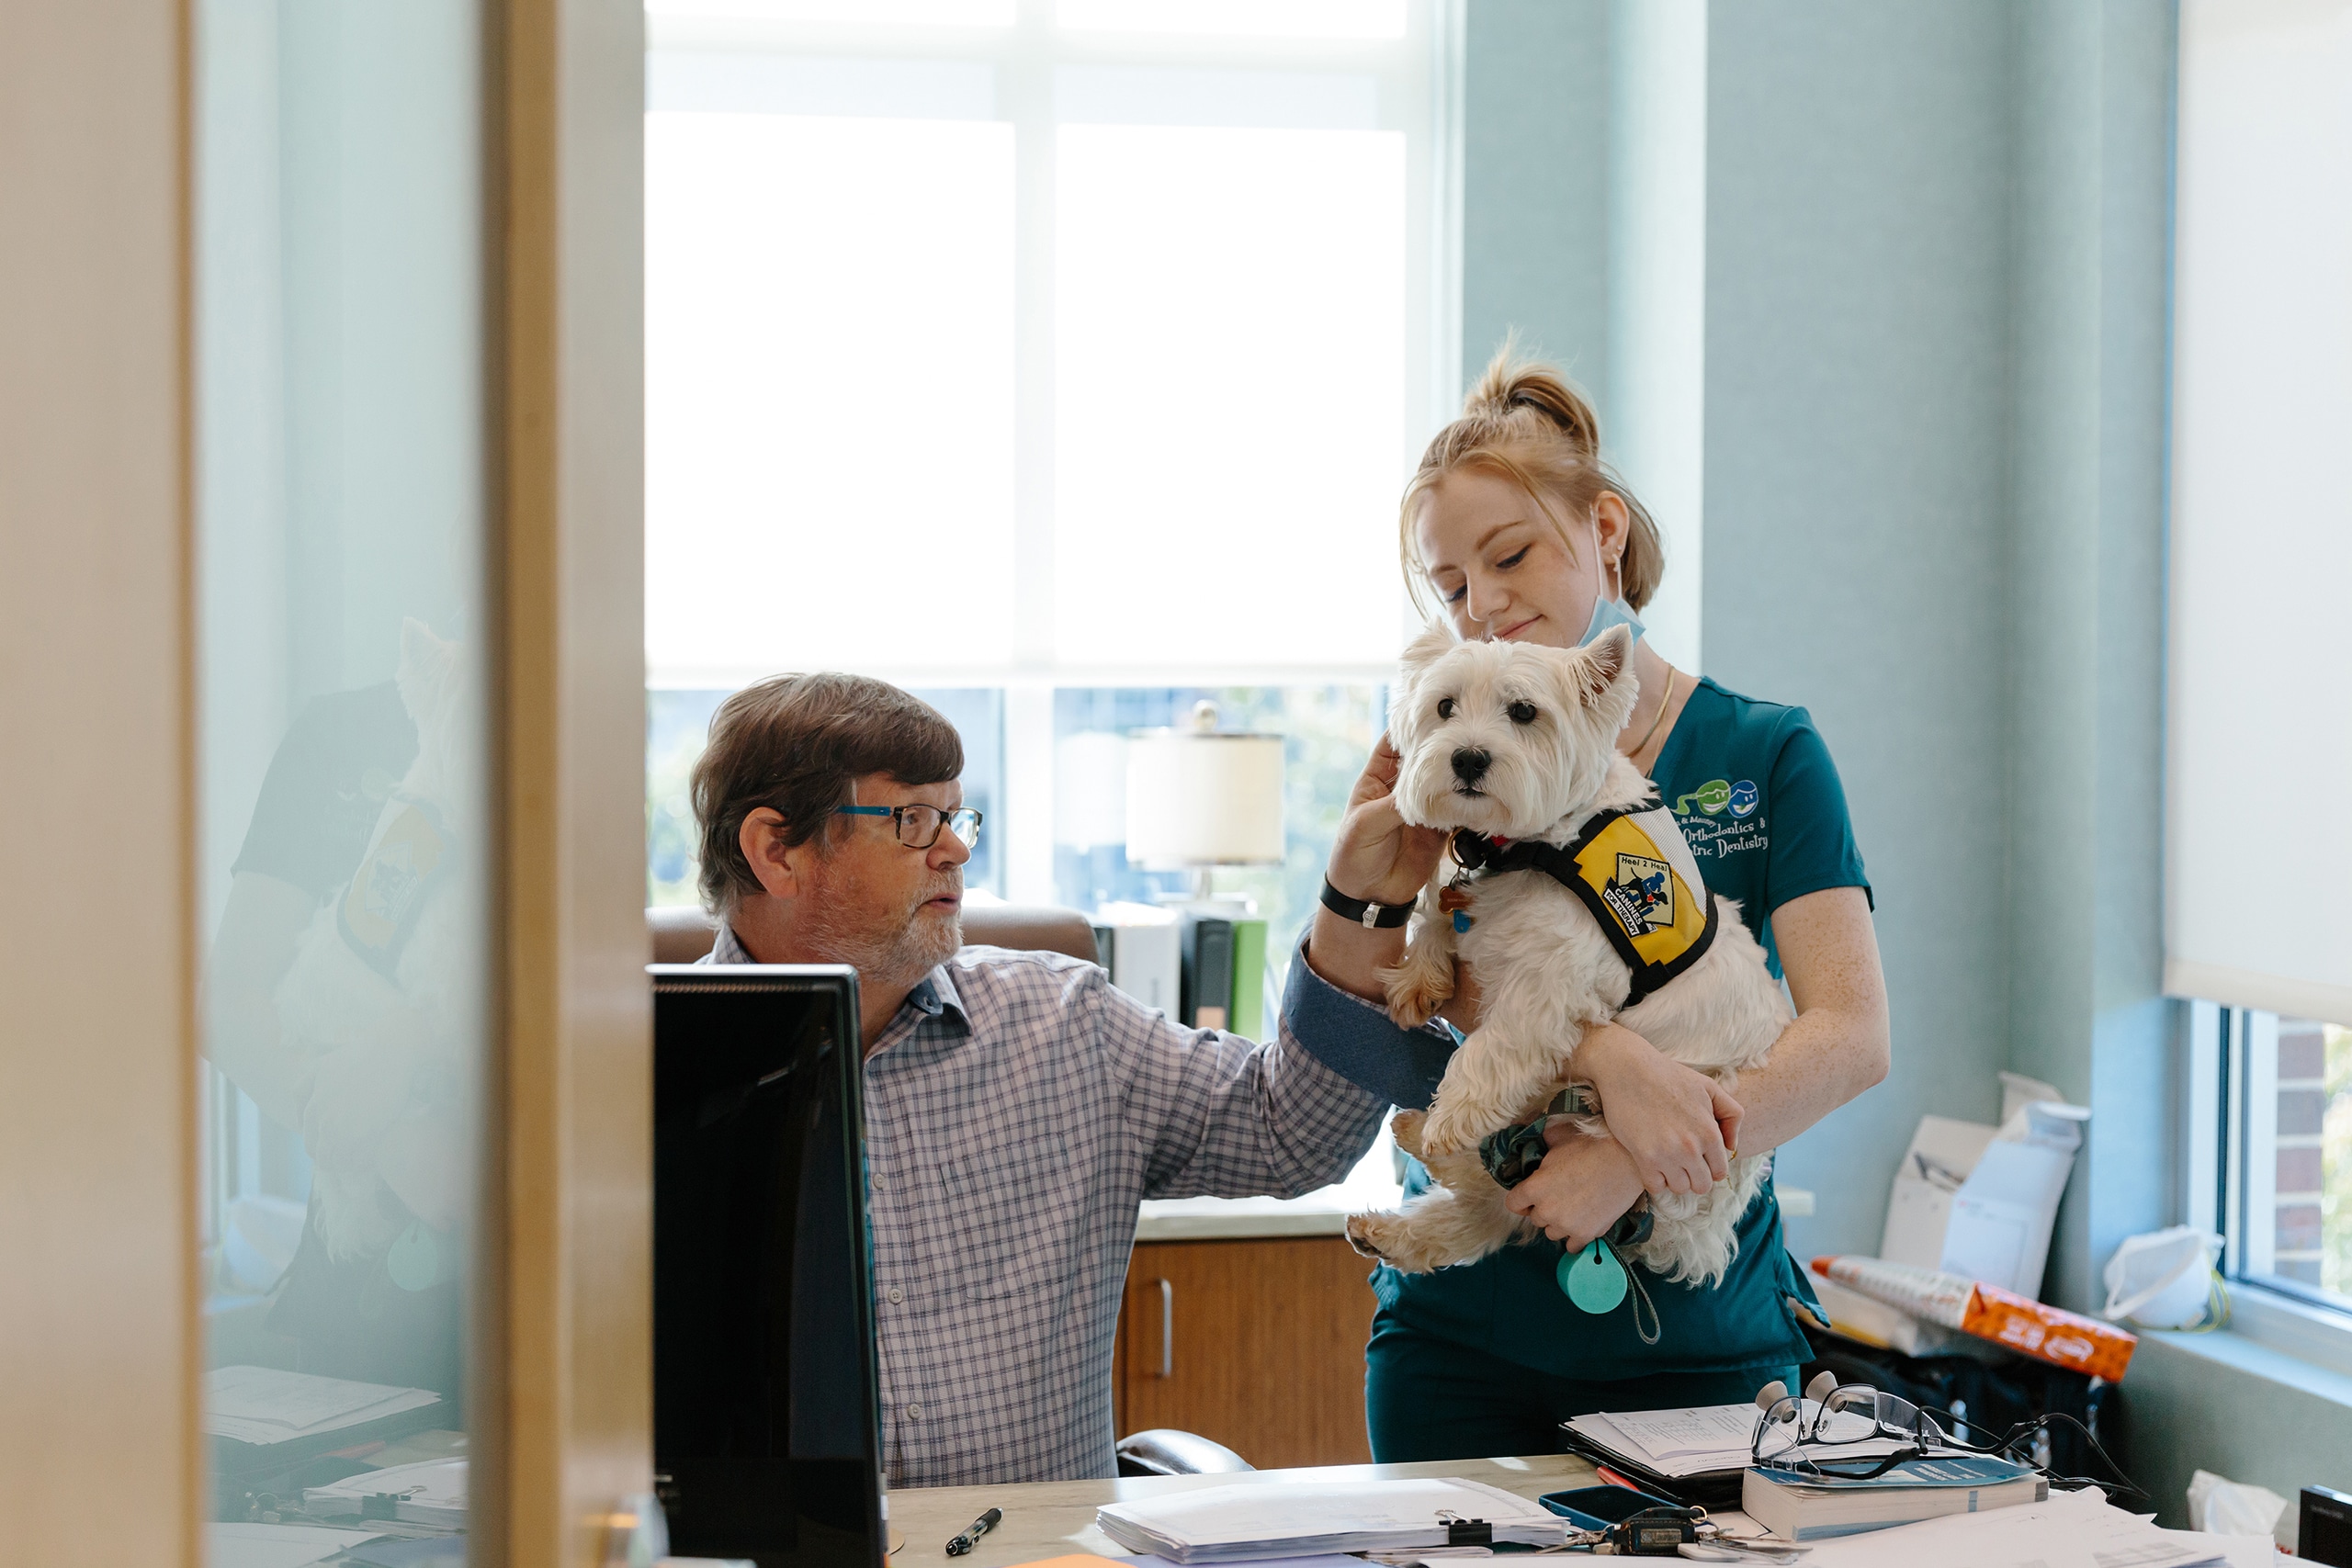 A man at his desk petting a dog that is held by a woman in blue scrubs.